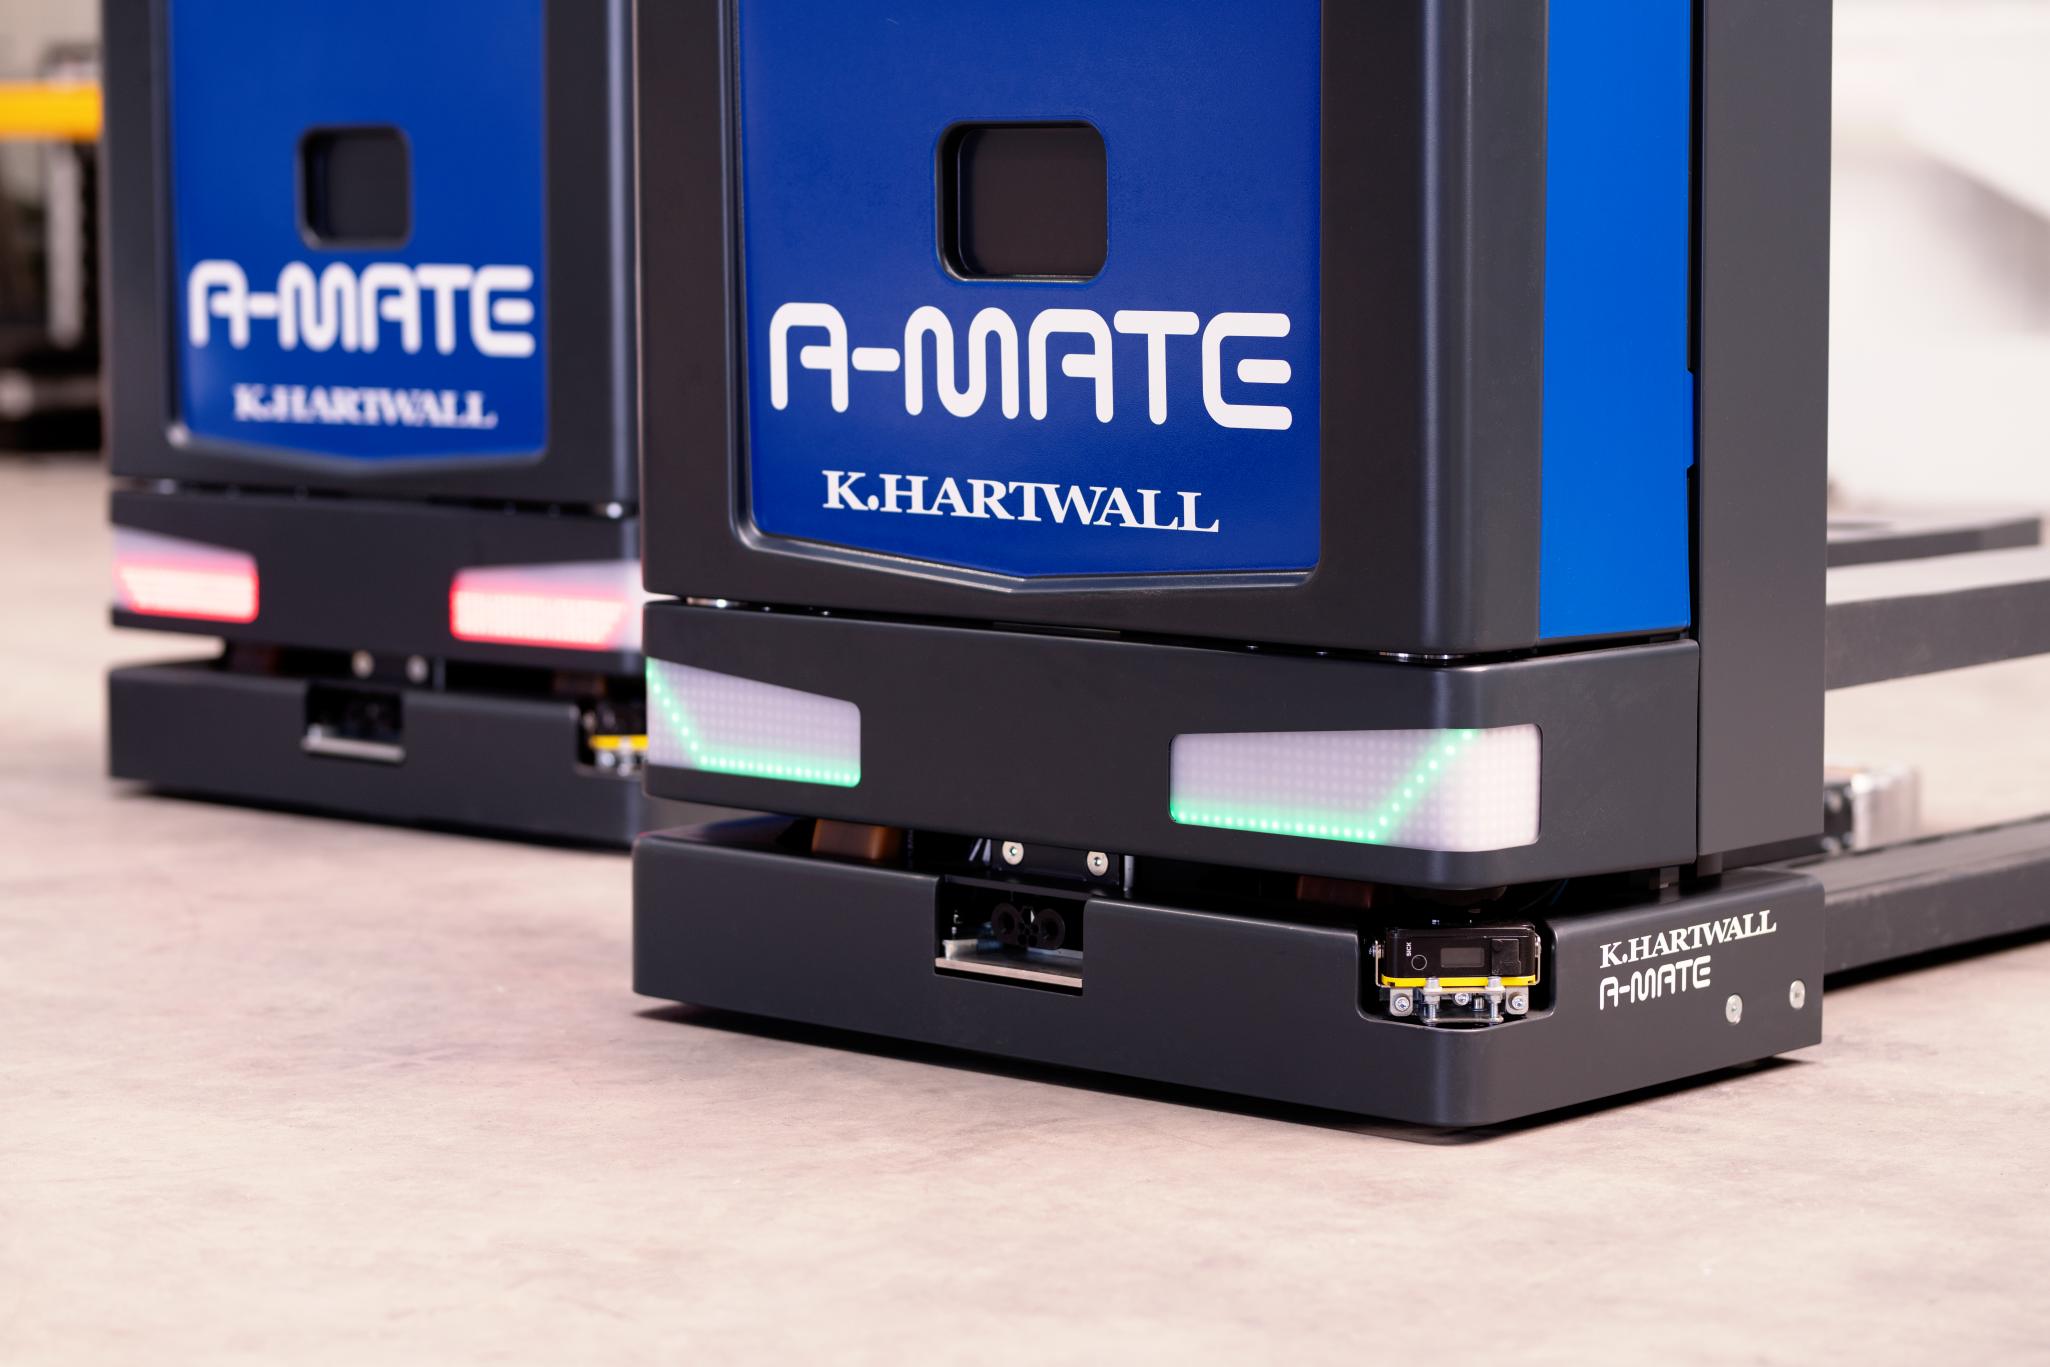 Slim design and omnidrive of A-MATE save time and money